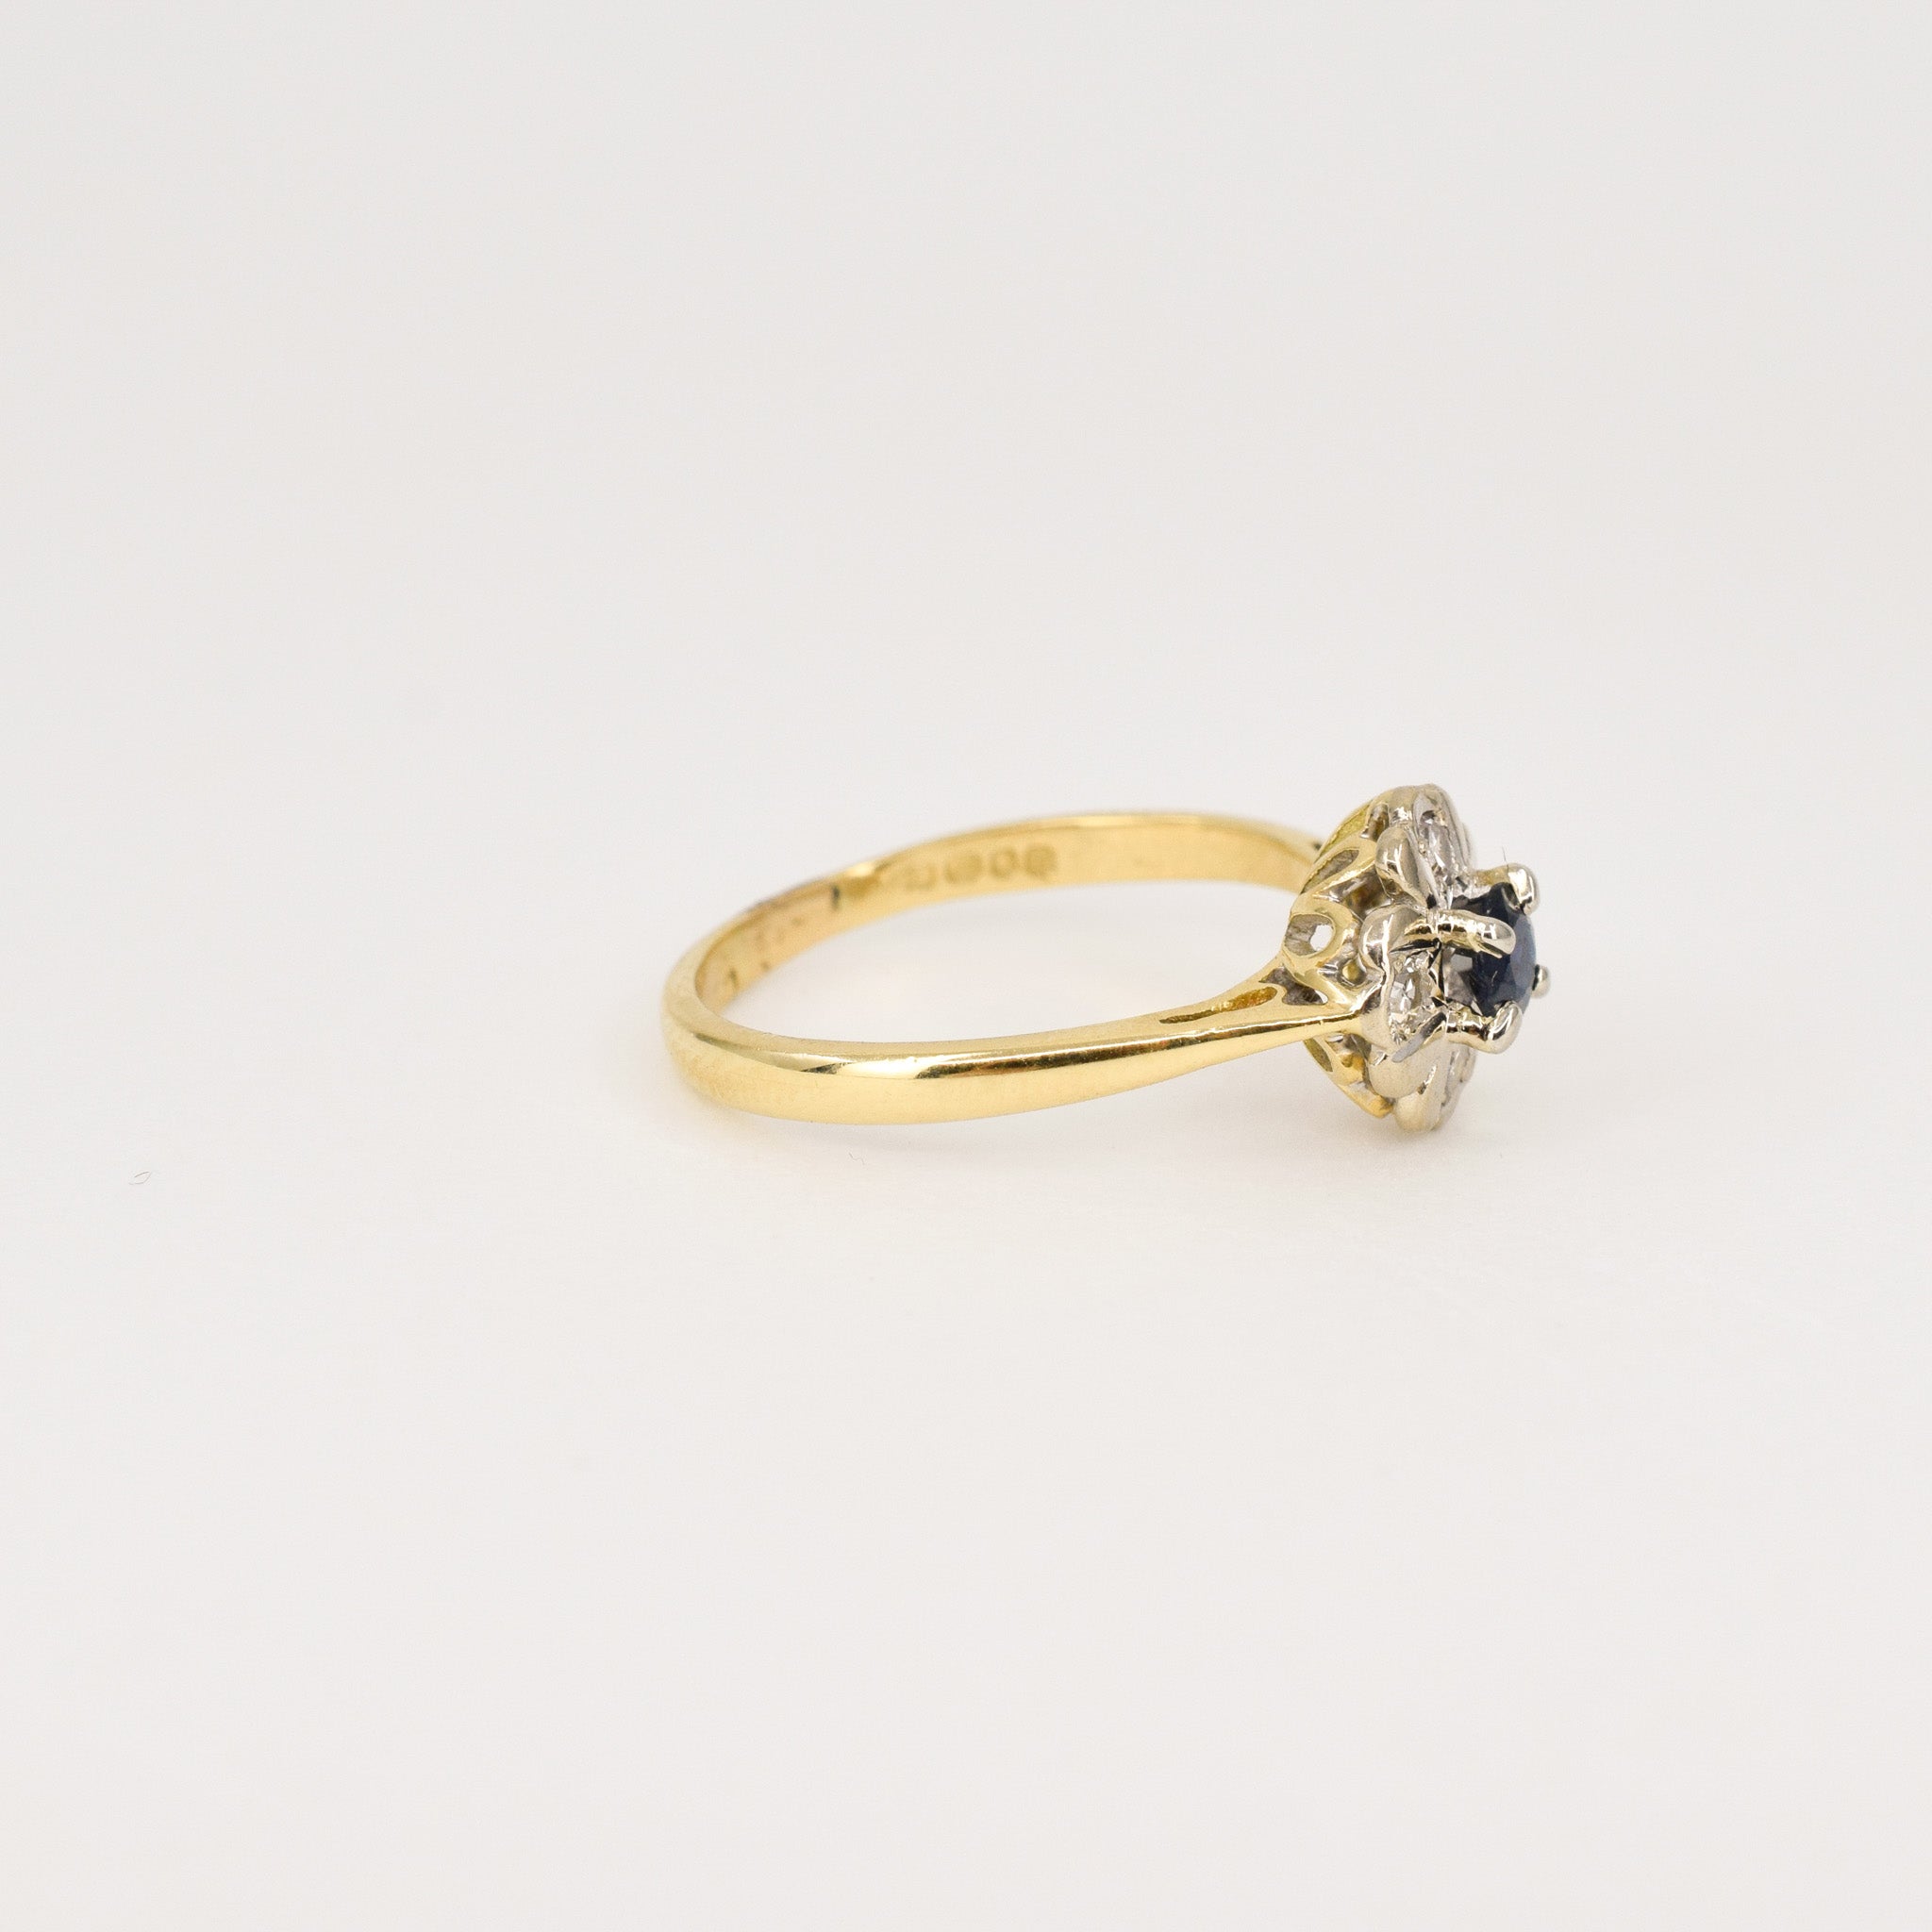 antique sapphire and diamond ring, folklor vintage jewelry canada vintage sapphire and diamond ring made in London in the 60's, folklor vintage jewelry canada 